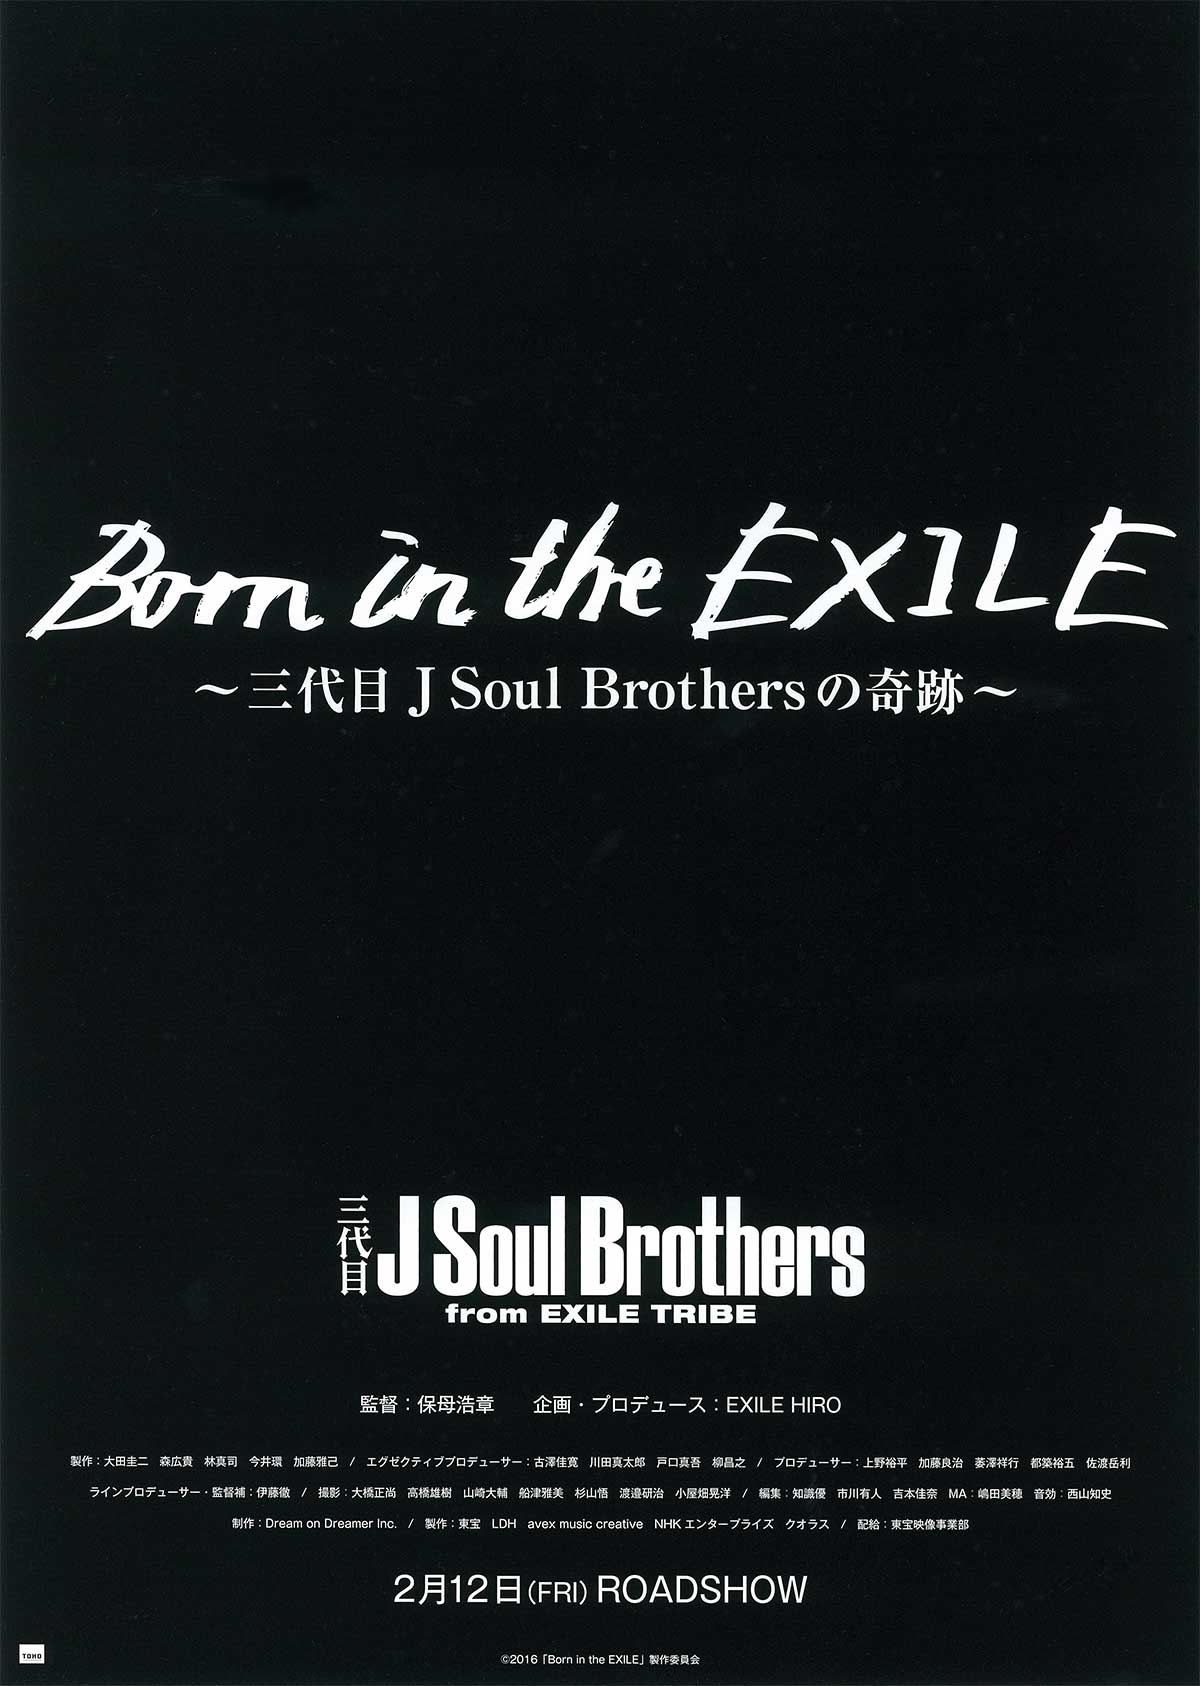 Born in the EXILE ～三代目J Soul Brothersの奇跡～の画像